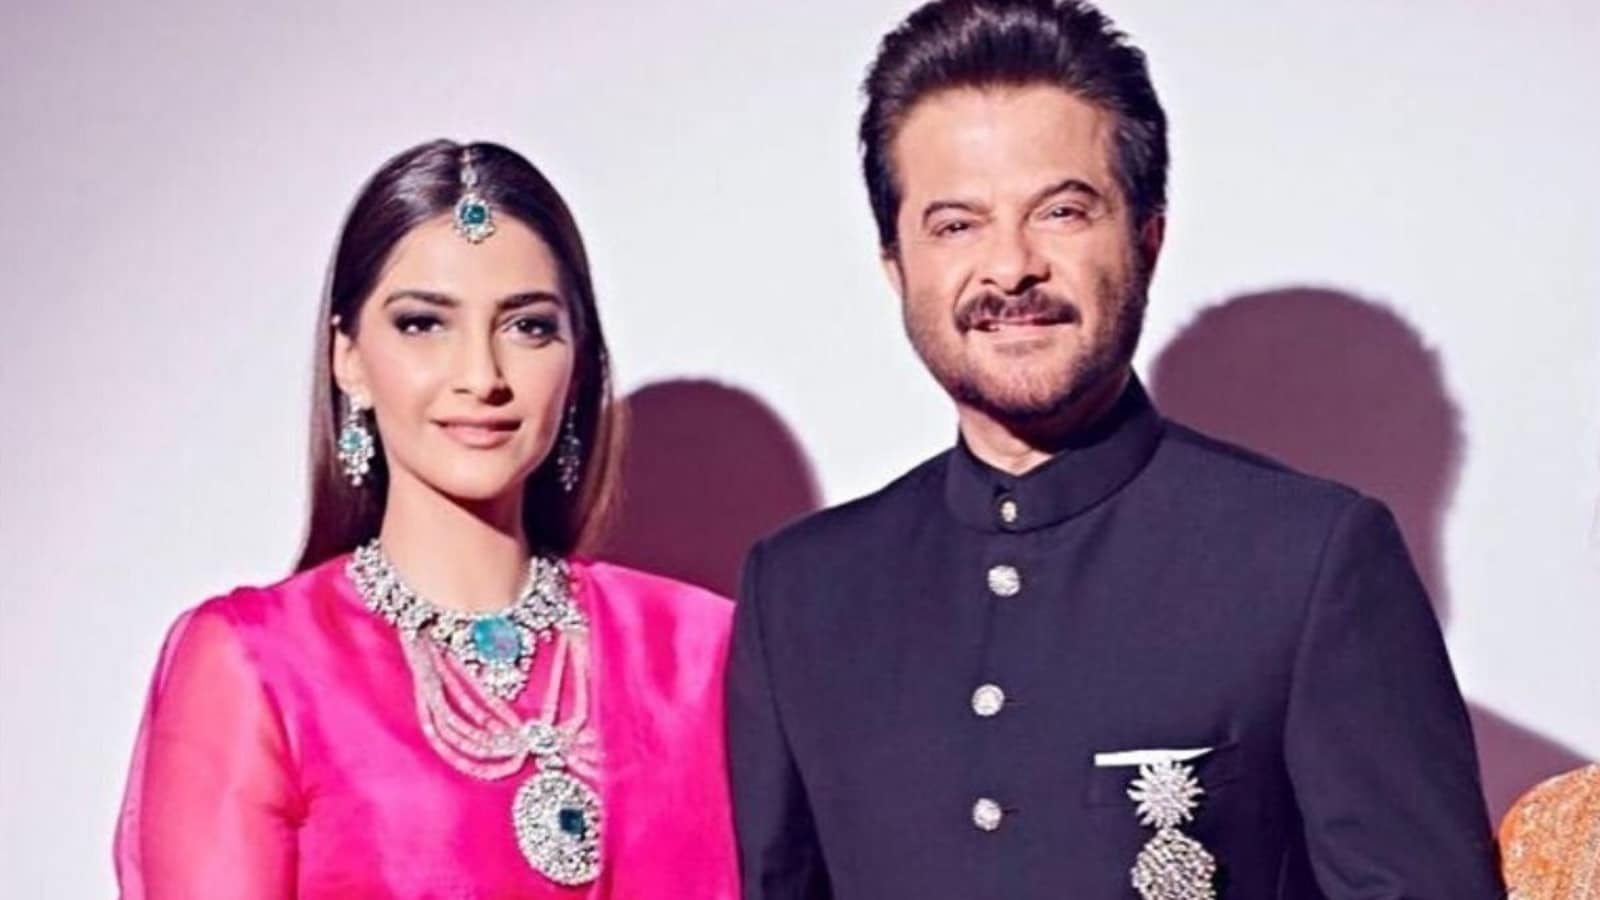 Anil Kapoor reacts to troll comment on him, Sonam Kapoor: 'Father ...